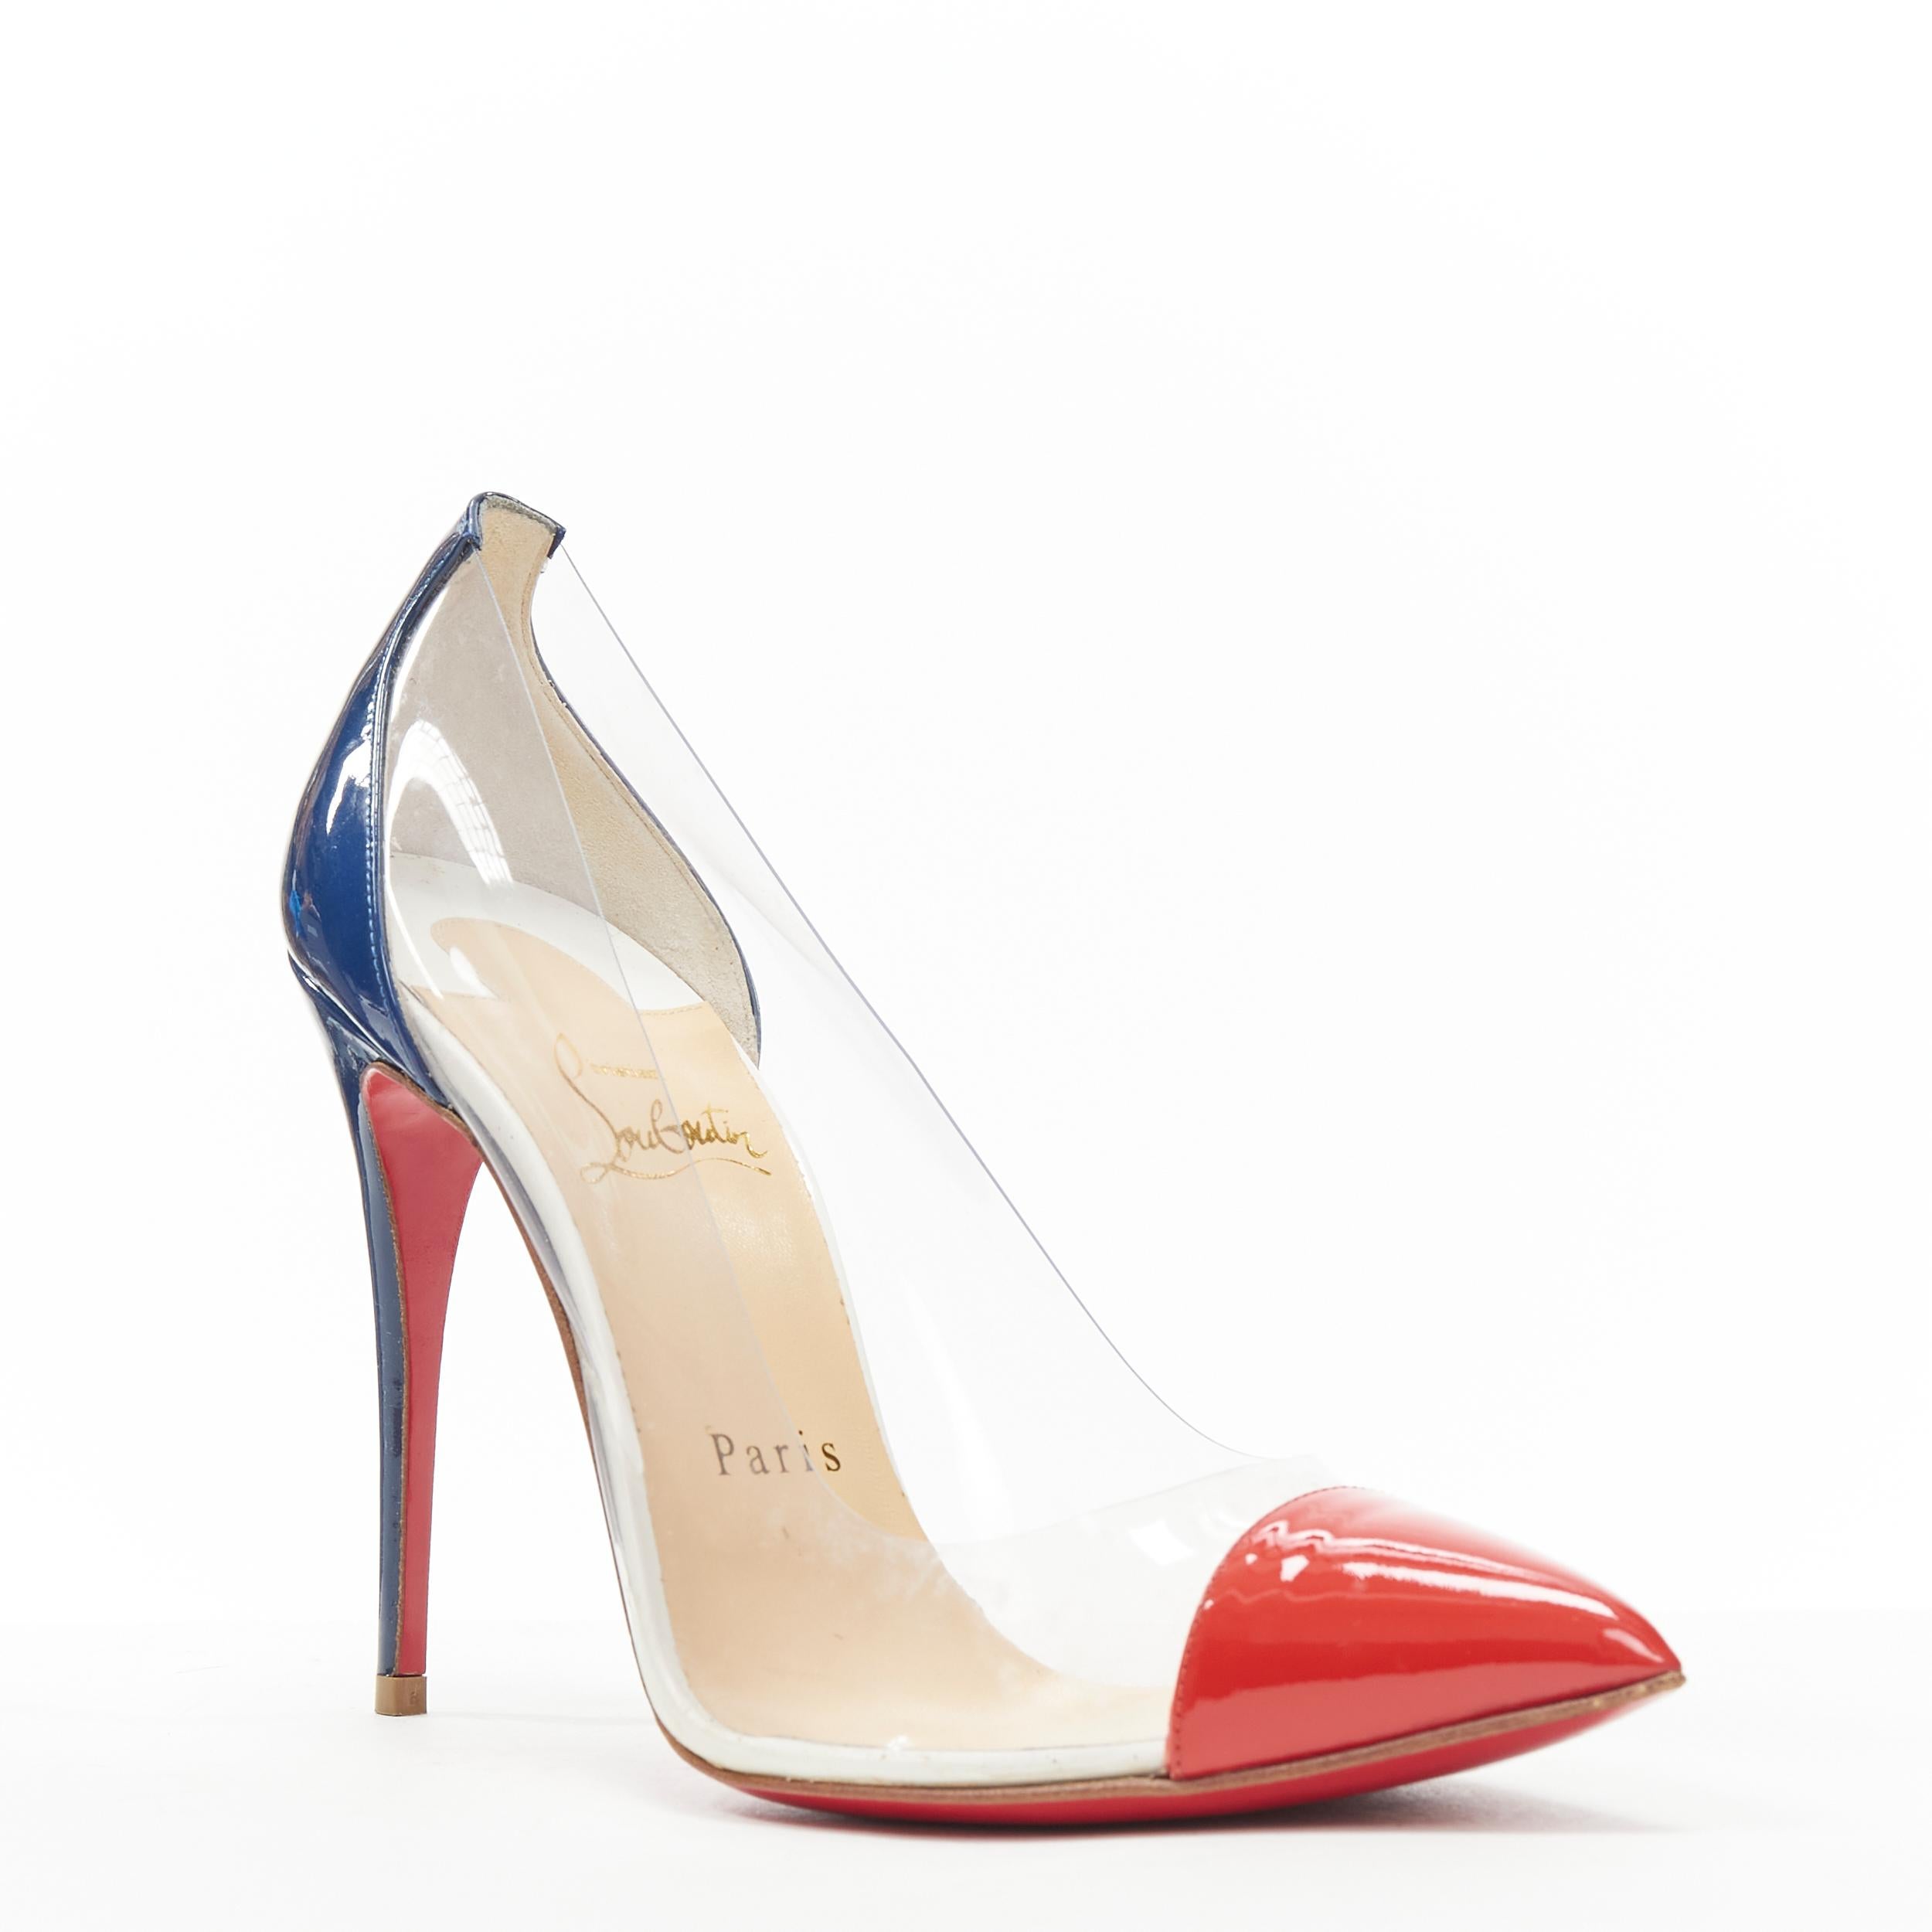 CHRISTIAN LOUBOUTIN Debout PVC red blue patent toe cap pigalle pump EU37 
Reference: TGAS/B01138 
Brand: Christian Louboutin
Model: Debout heel 
Material: Plastic 
Color: Blue 
Pattern: Solid 
Extra Detail: Debout. Clear PVC upper. Red and blue